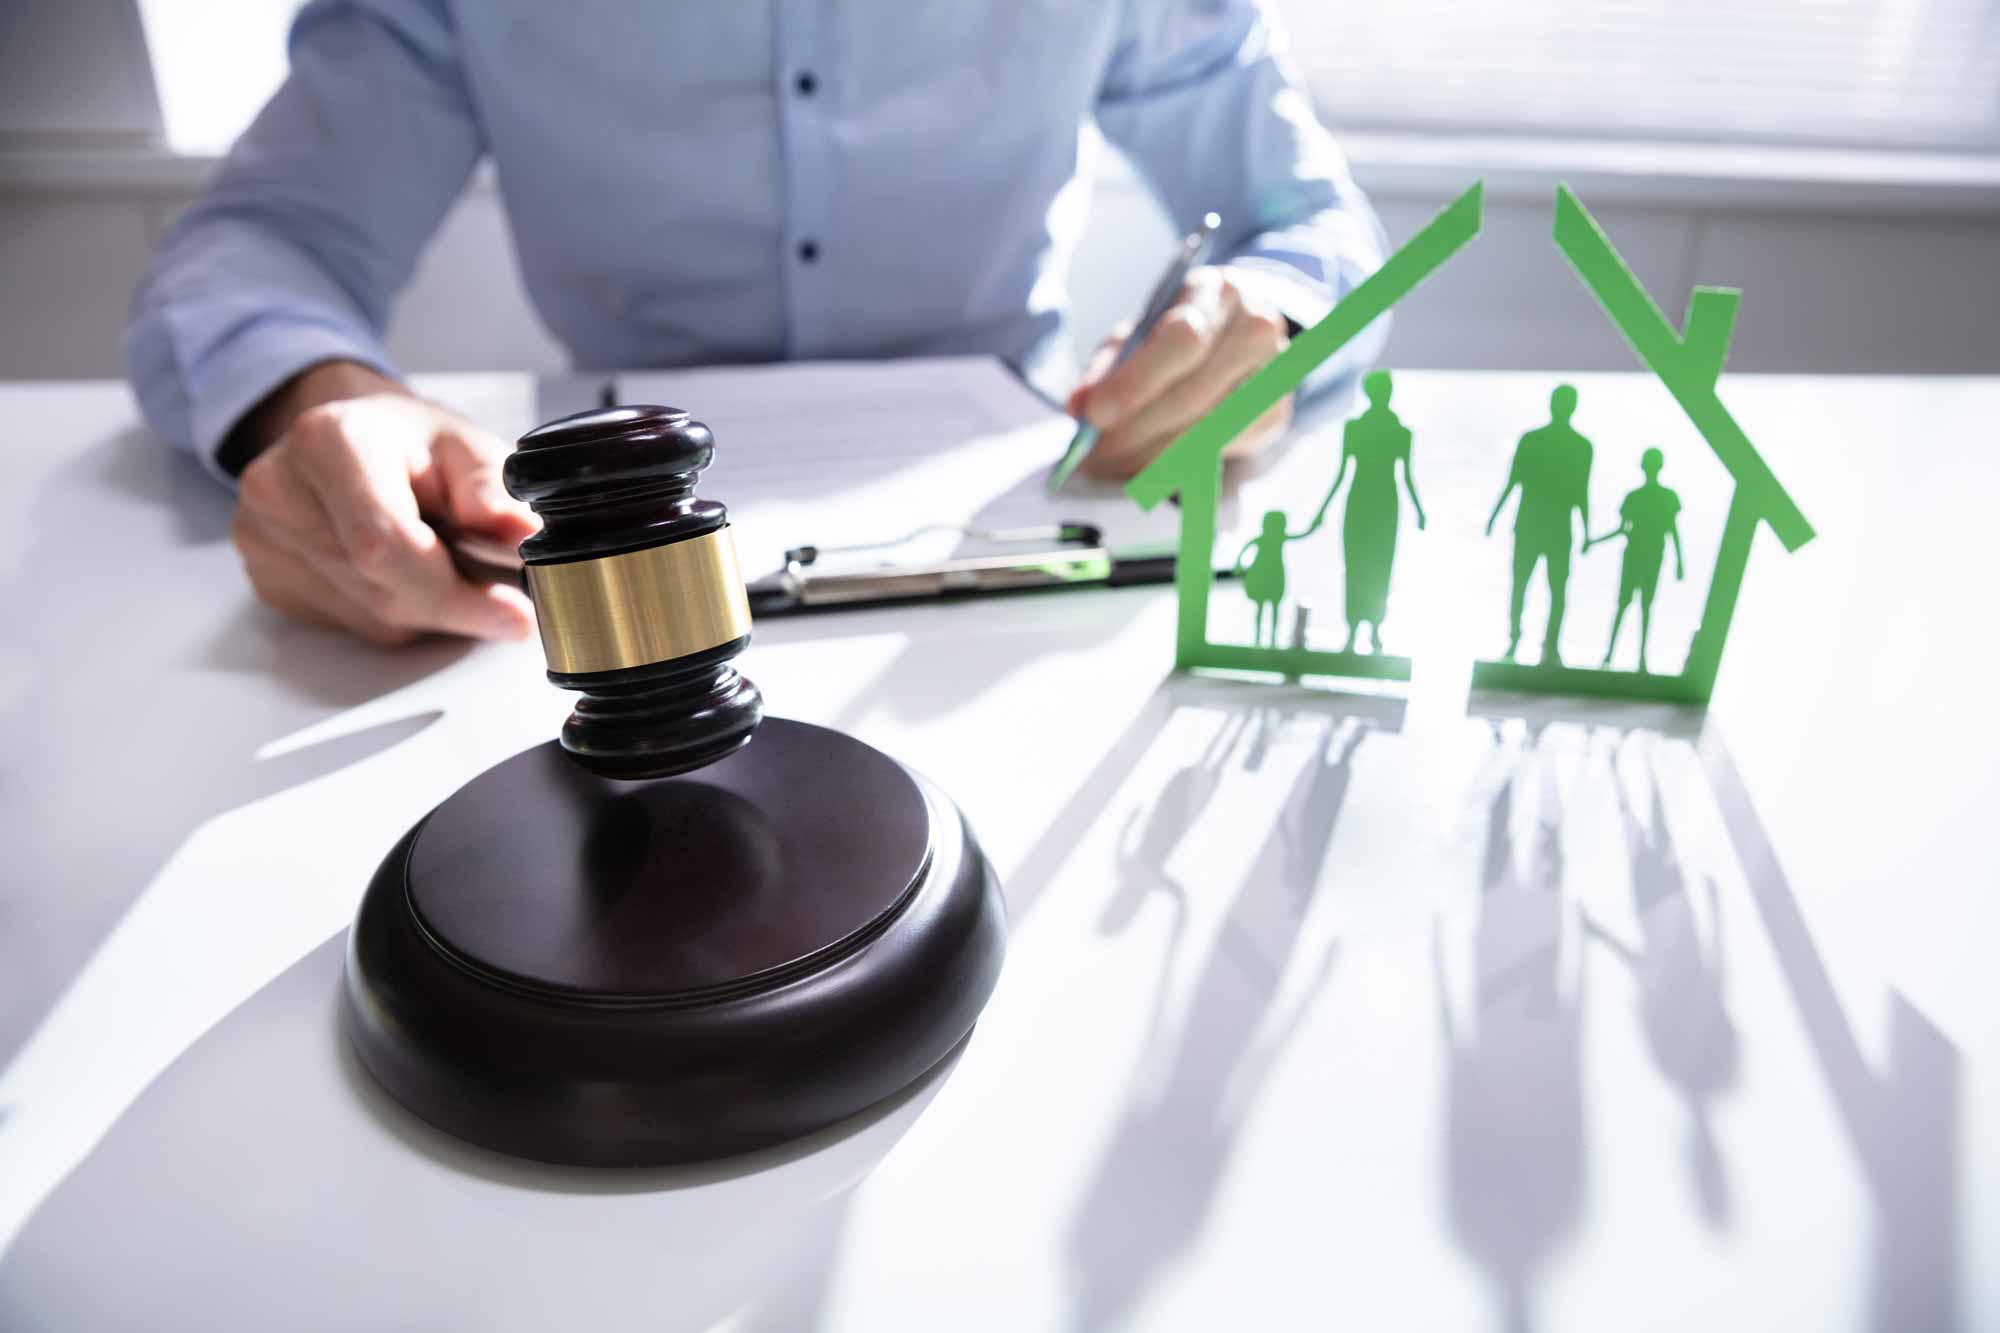 Most family law property settlements are finalised by negotiation between the parties and their legal advisors